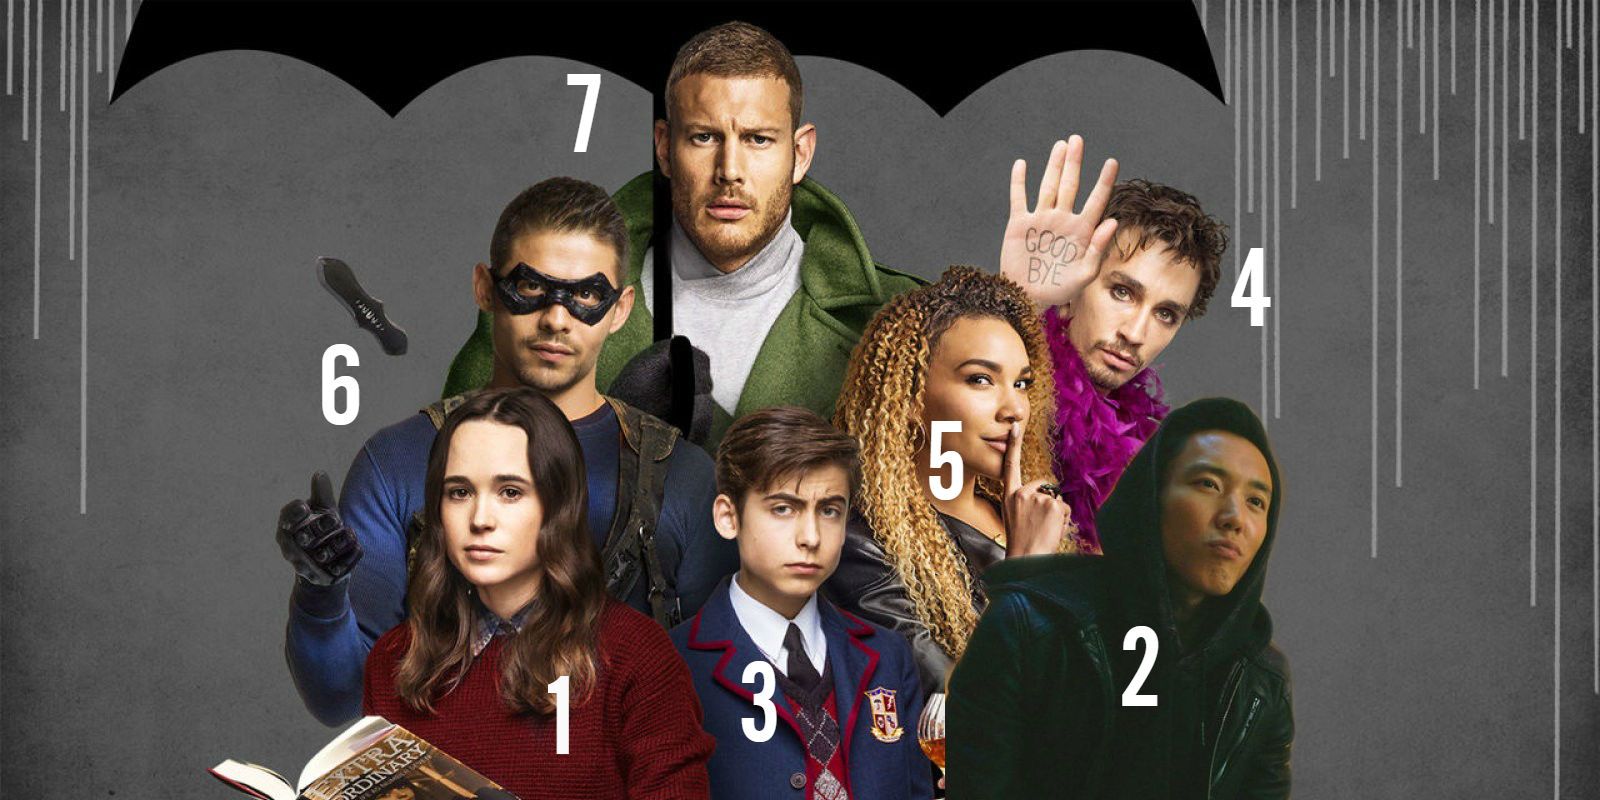 The Umbrella Academy dice number theory